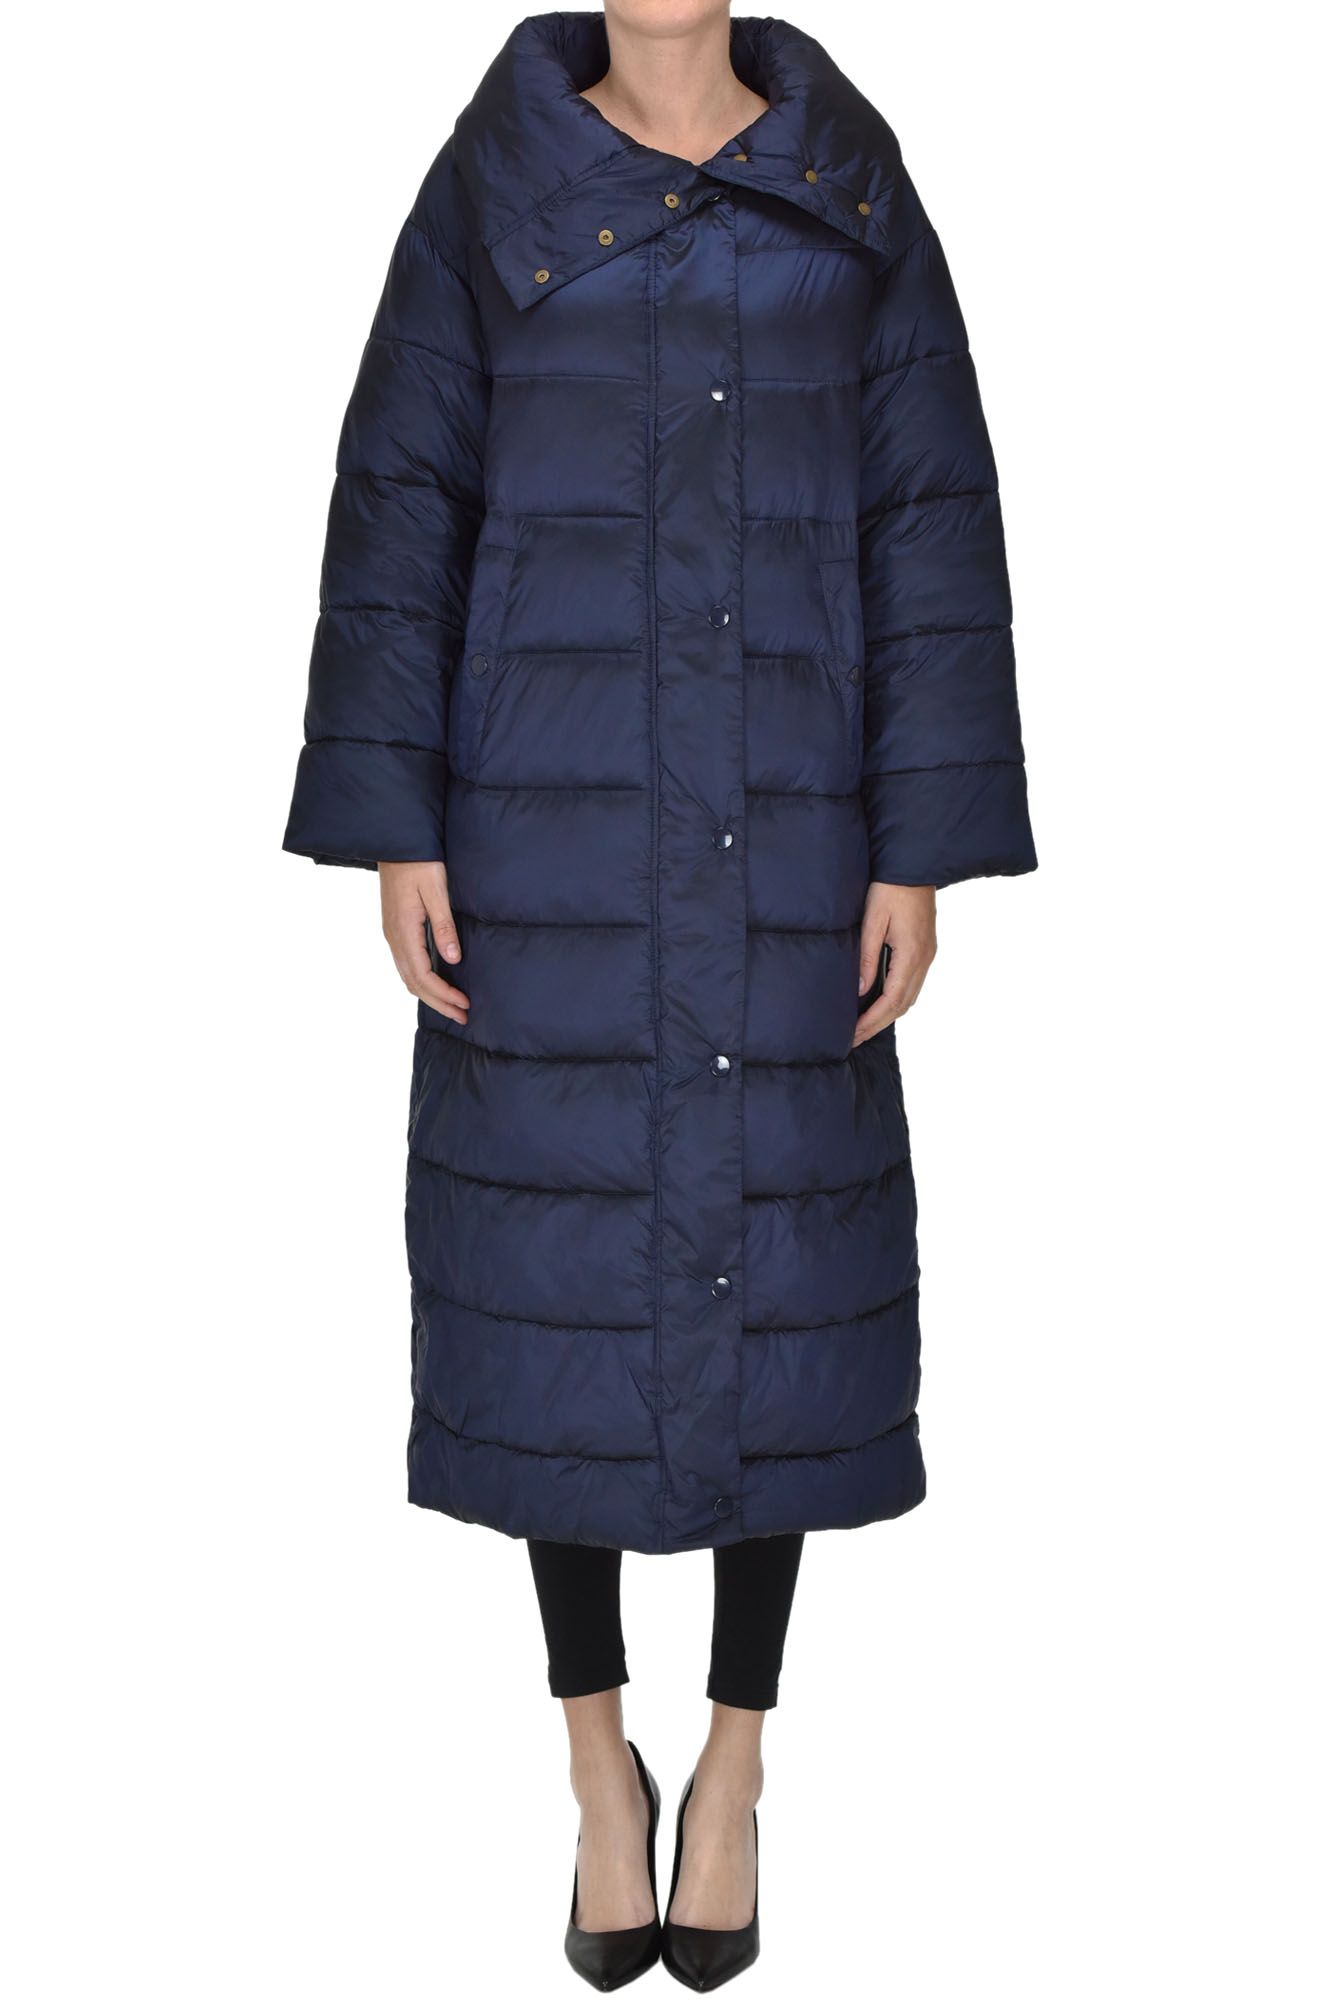 Oof Quilted eco-friendly long down jacket - Buy online on Glamest ...